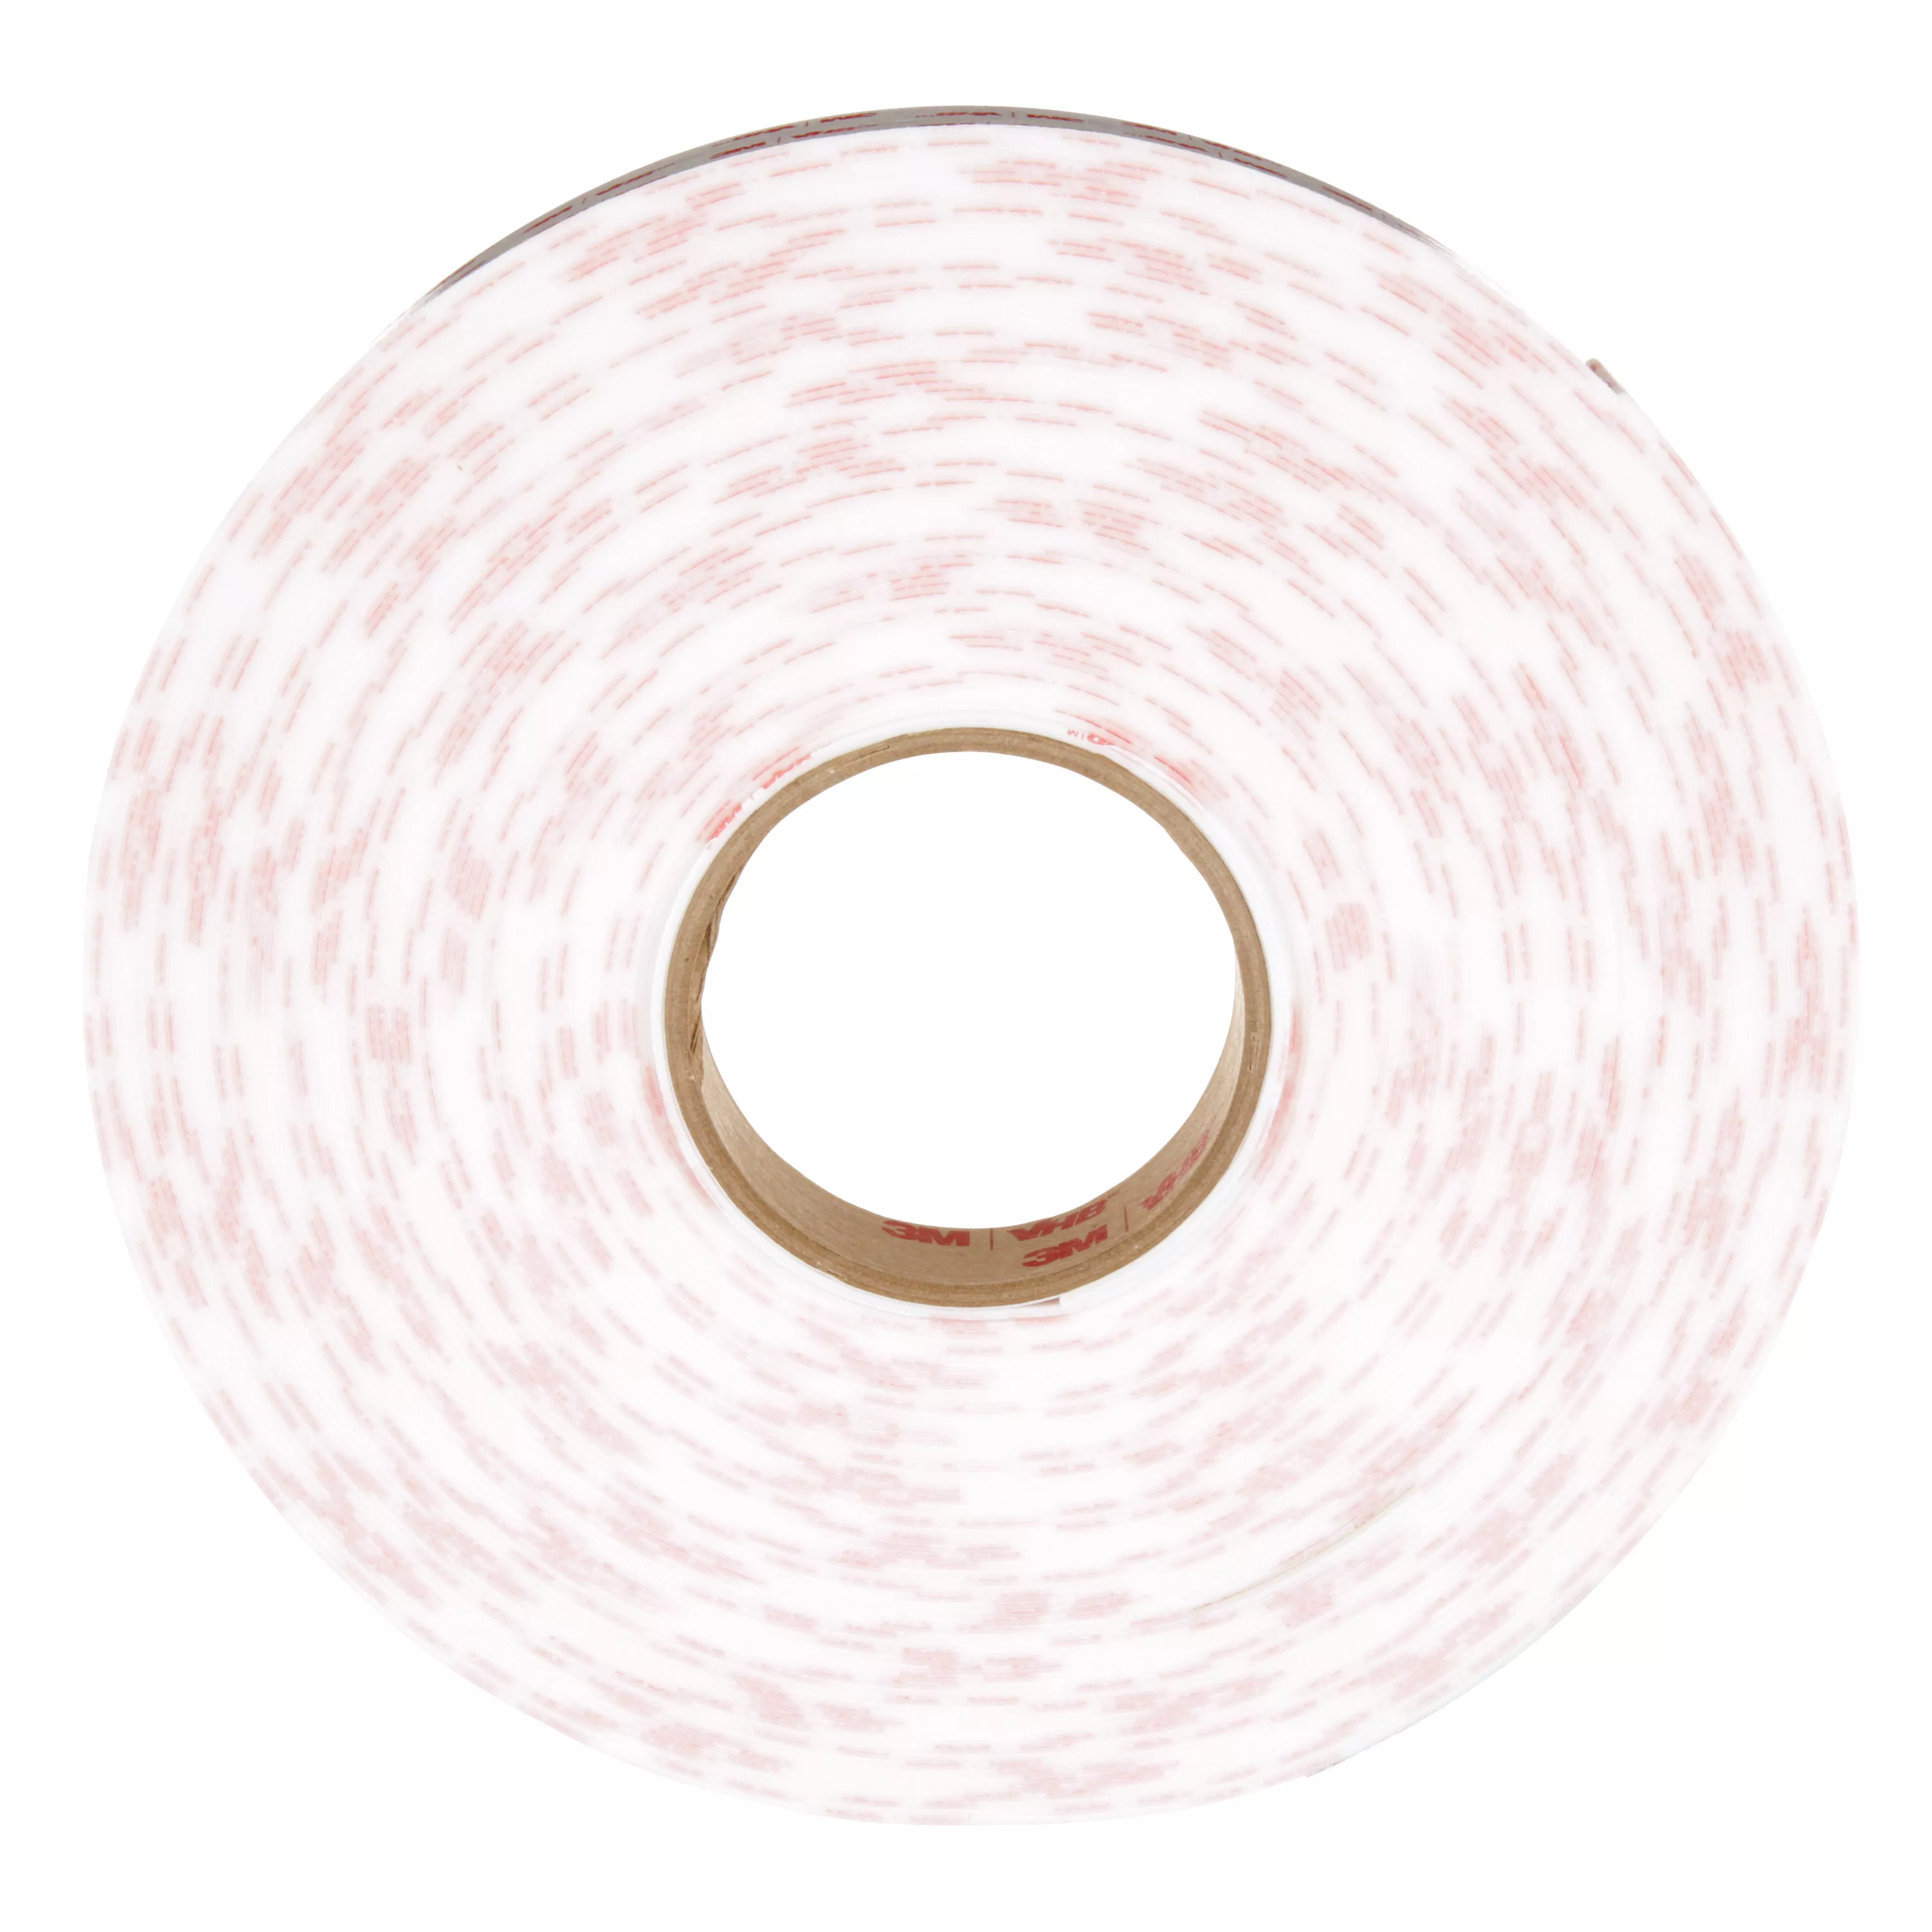 Product Number 4930 | 3M™ VHB™ Tape 4930